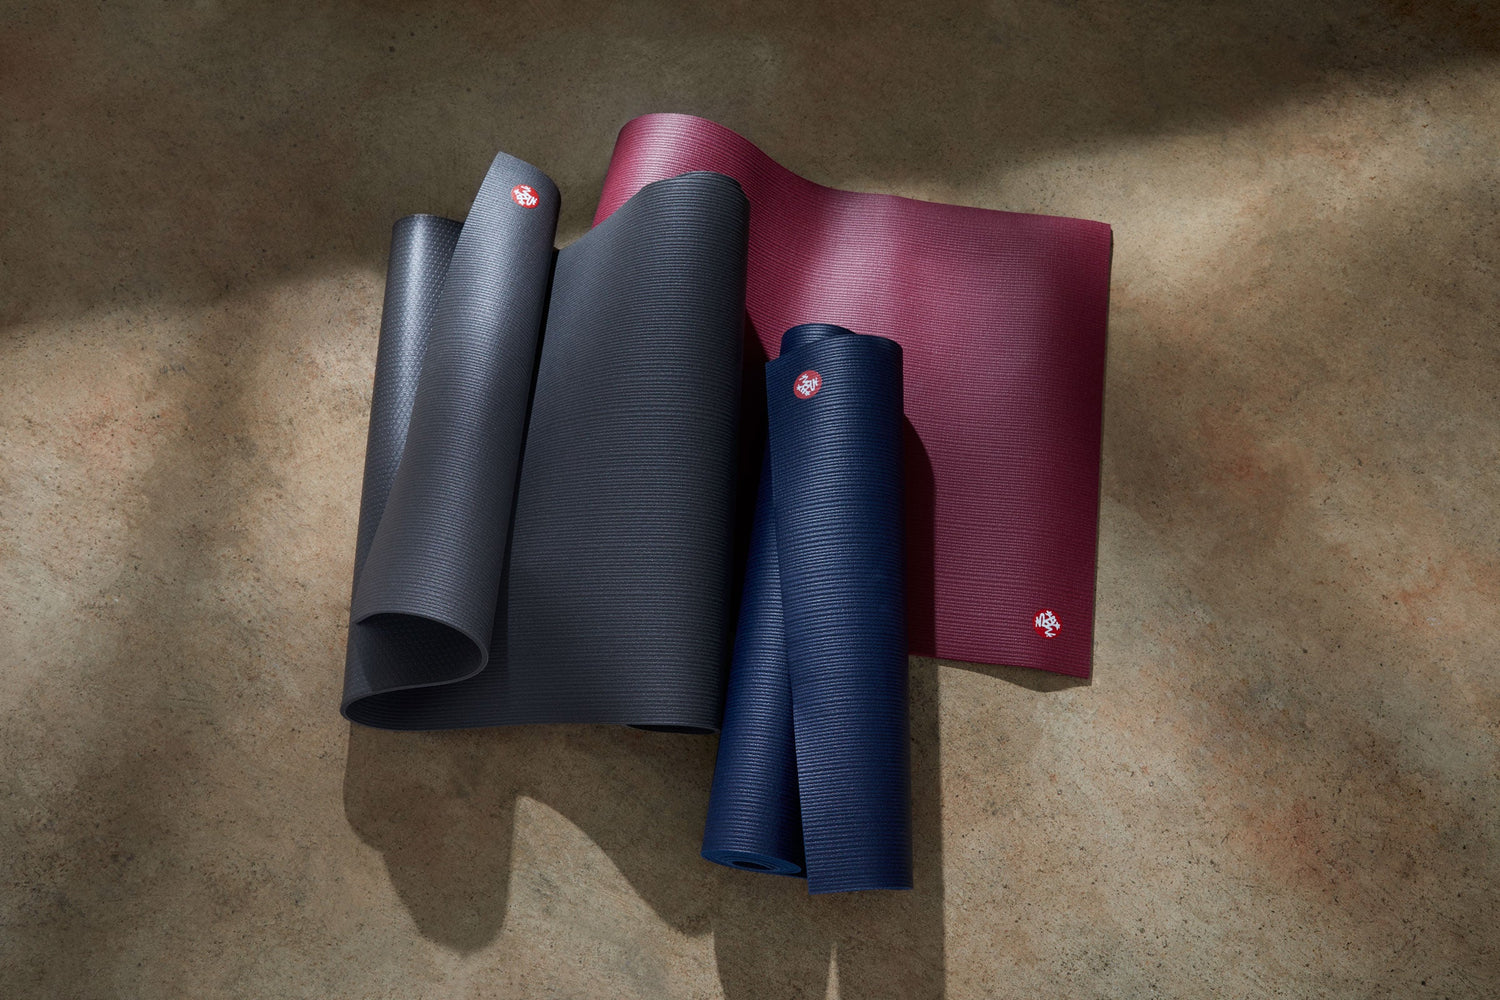 manduka pro mats on the floor in thunder, verve and midnight colors